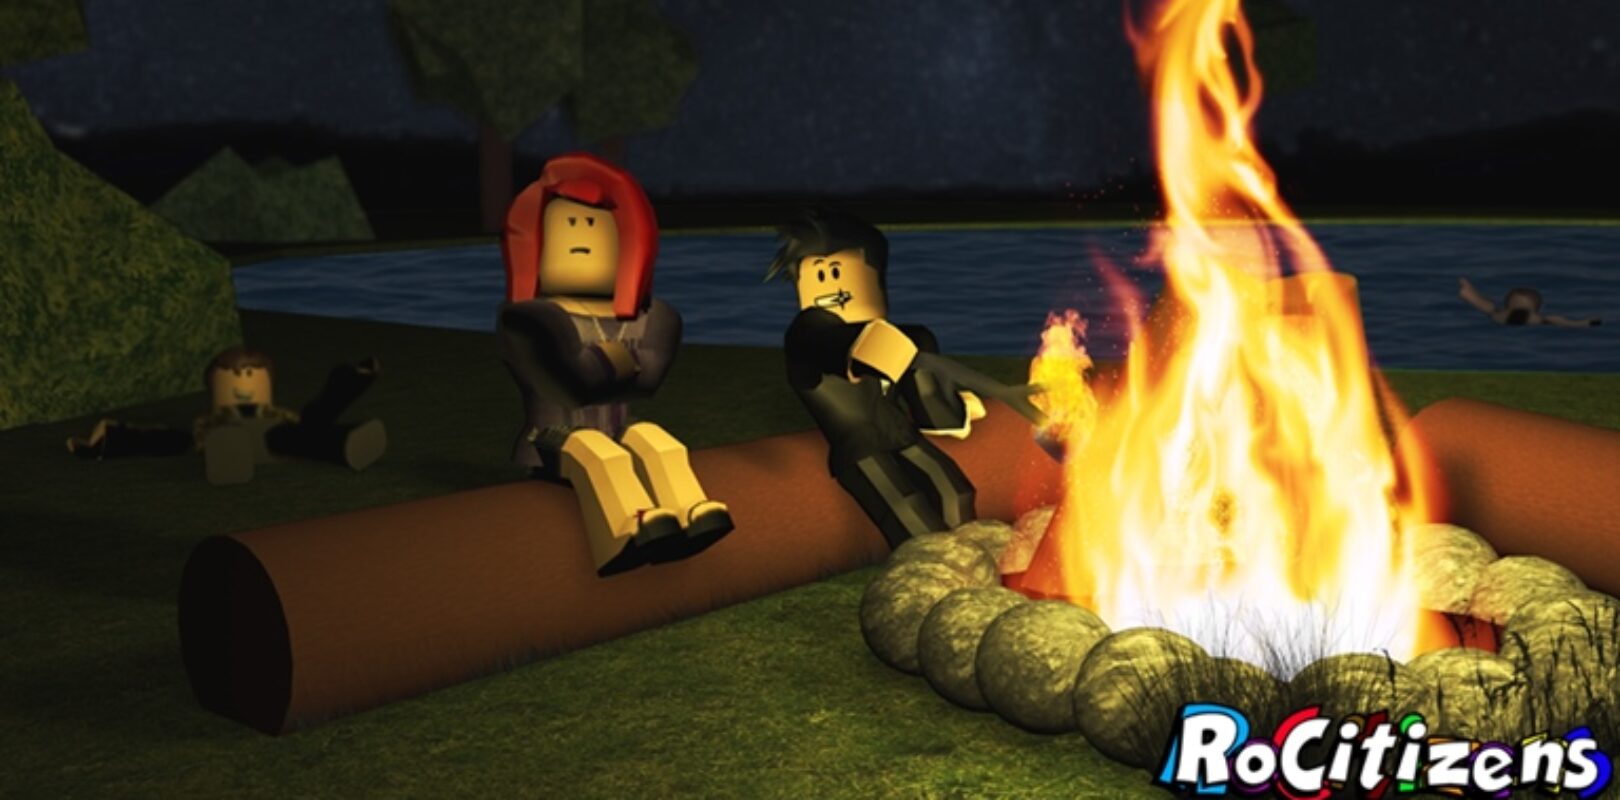 Rocitizens Codes 2020 Pivotal Gamers - roblox rocitizens codes 2019 july